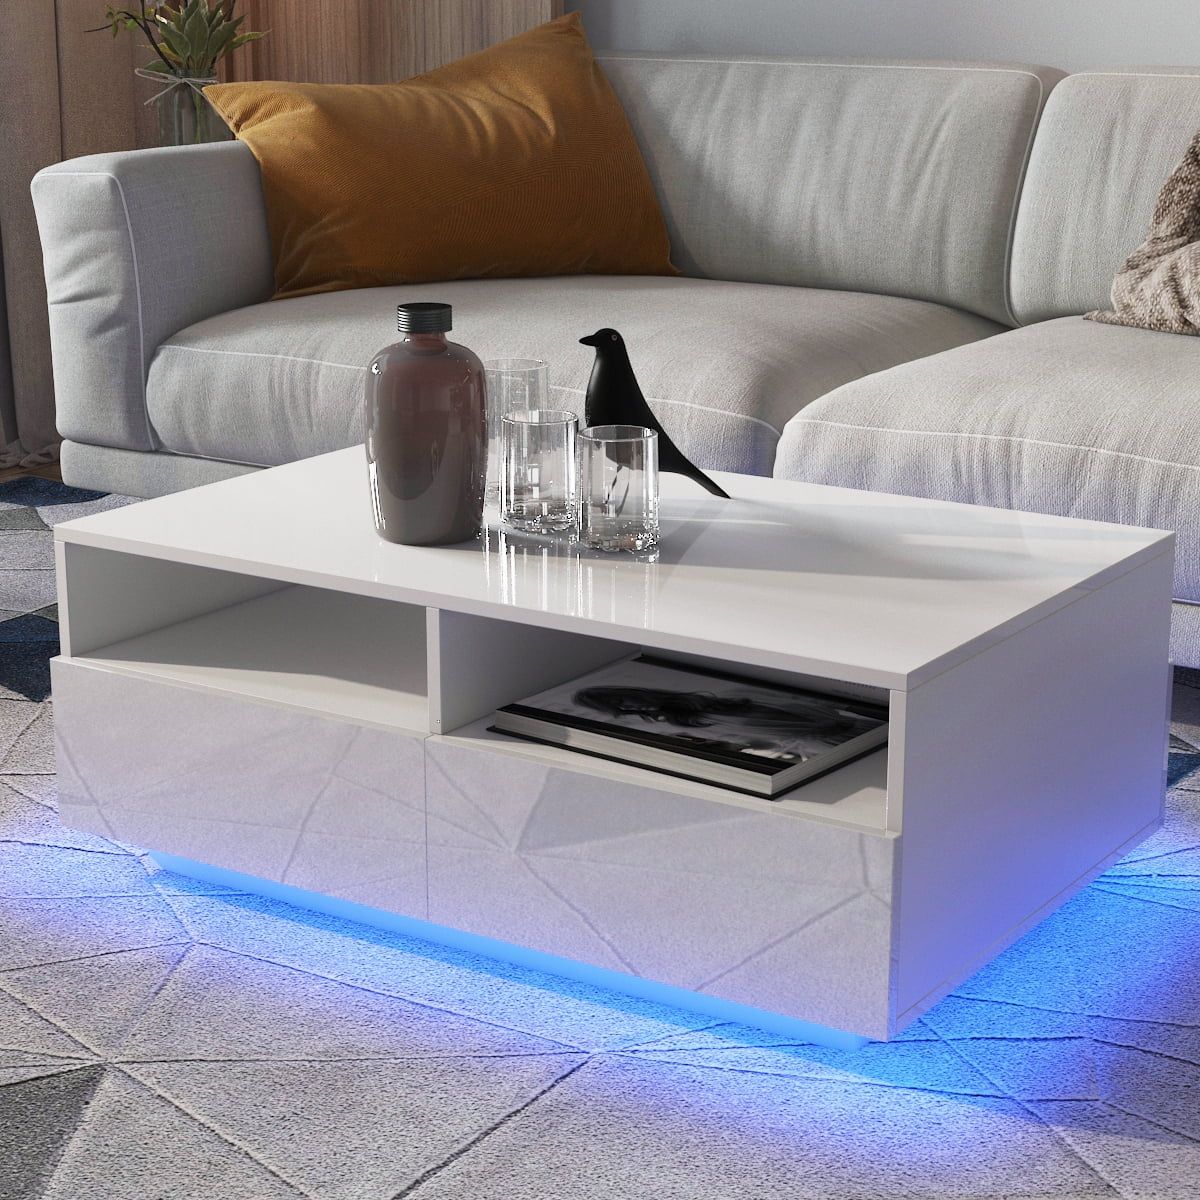 Hommpa Coffee Table With 4 Drawers And Open Shelf Led Center Table Sofa Side  Tea Tables White High Gloss Finish – Walmart Regarding Led Coffee Tables With 4 Drawers (View 2 of 15)